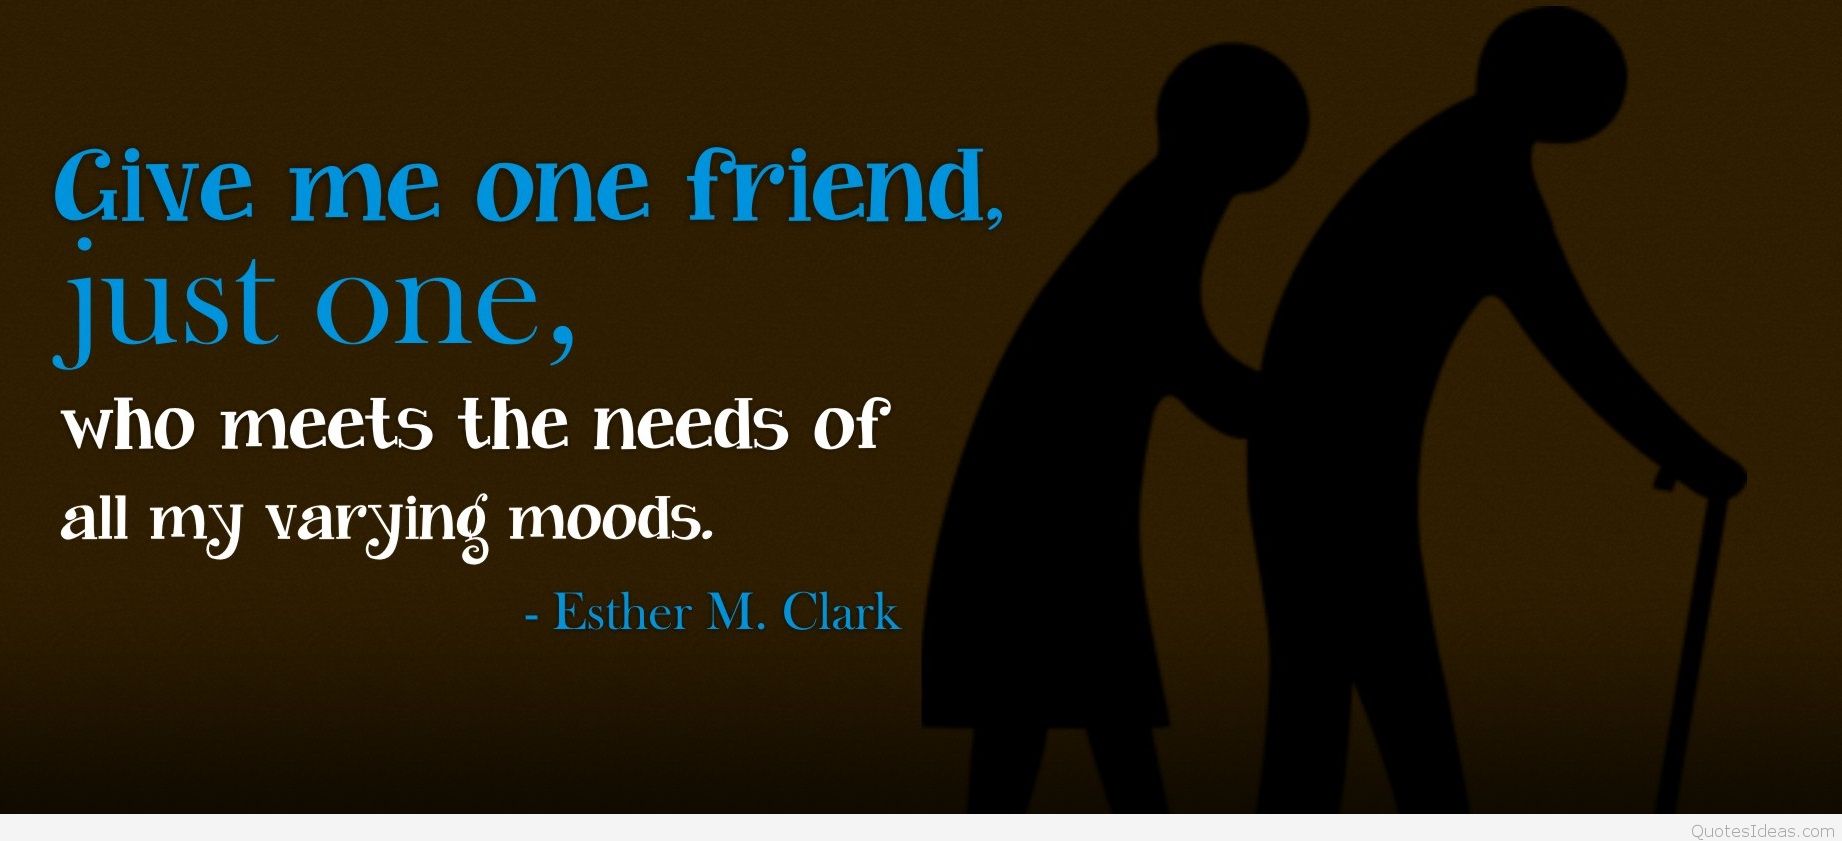 Inspiring Quotes About Friendship Cool Funny Friendship - Poster - HD Wallpaper 